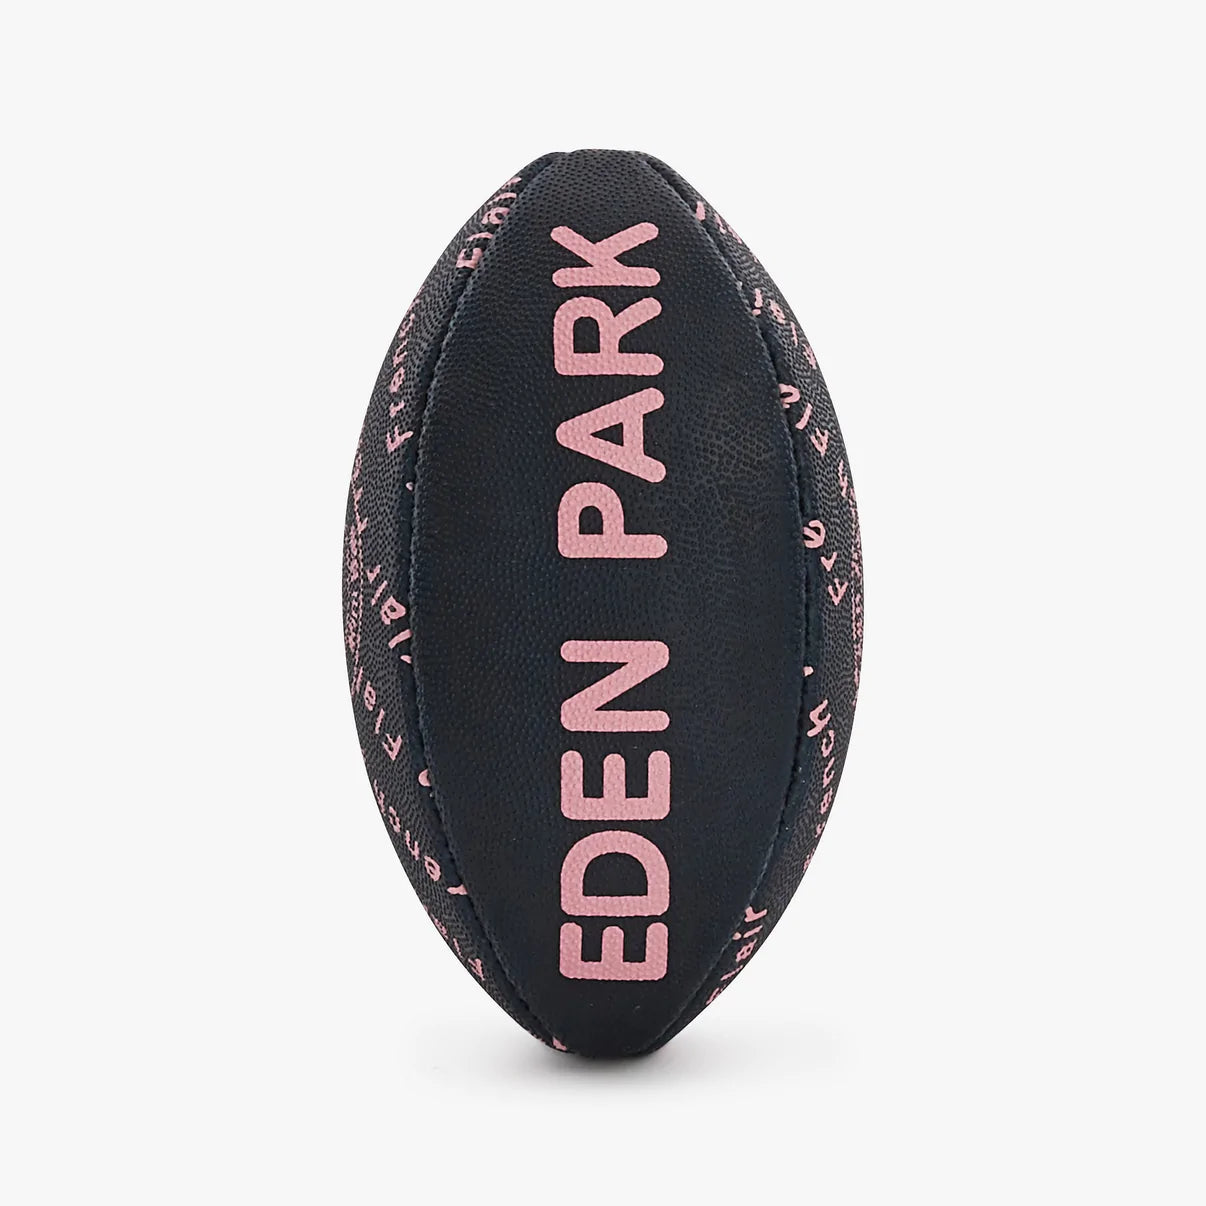 Mini rugby ball by Eden Park